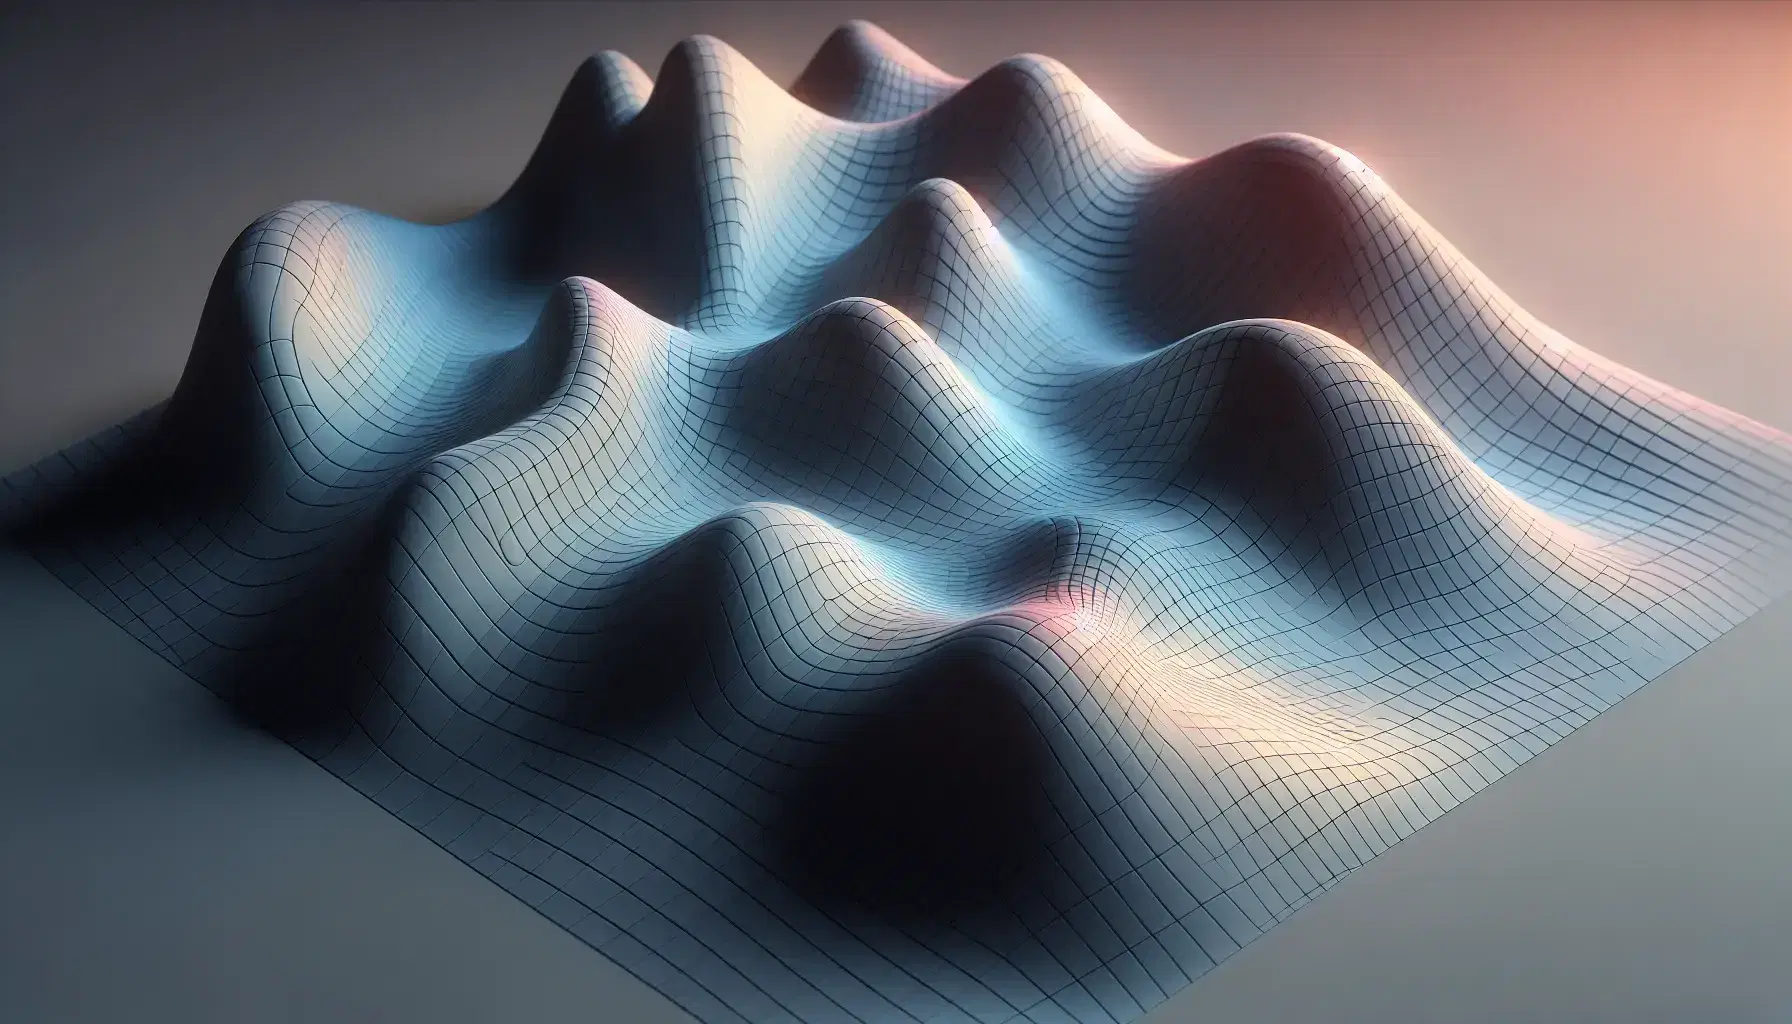 3D mathematical surface visualization with a gradient from blue in low areas to red at peaks, highlighting the smooth, undulating topography.